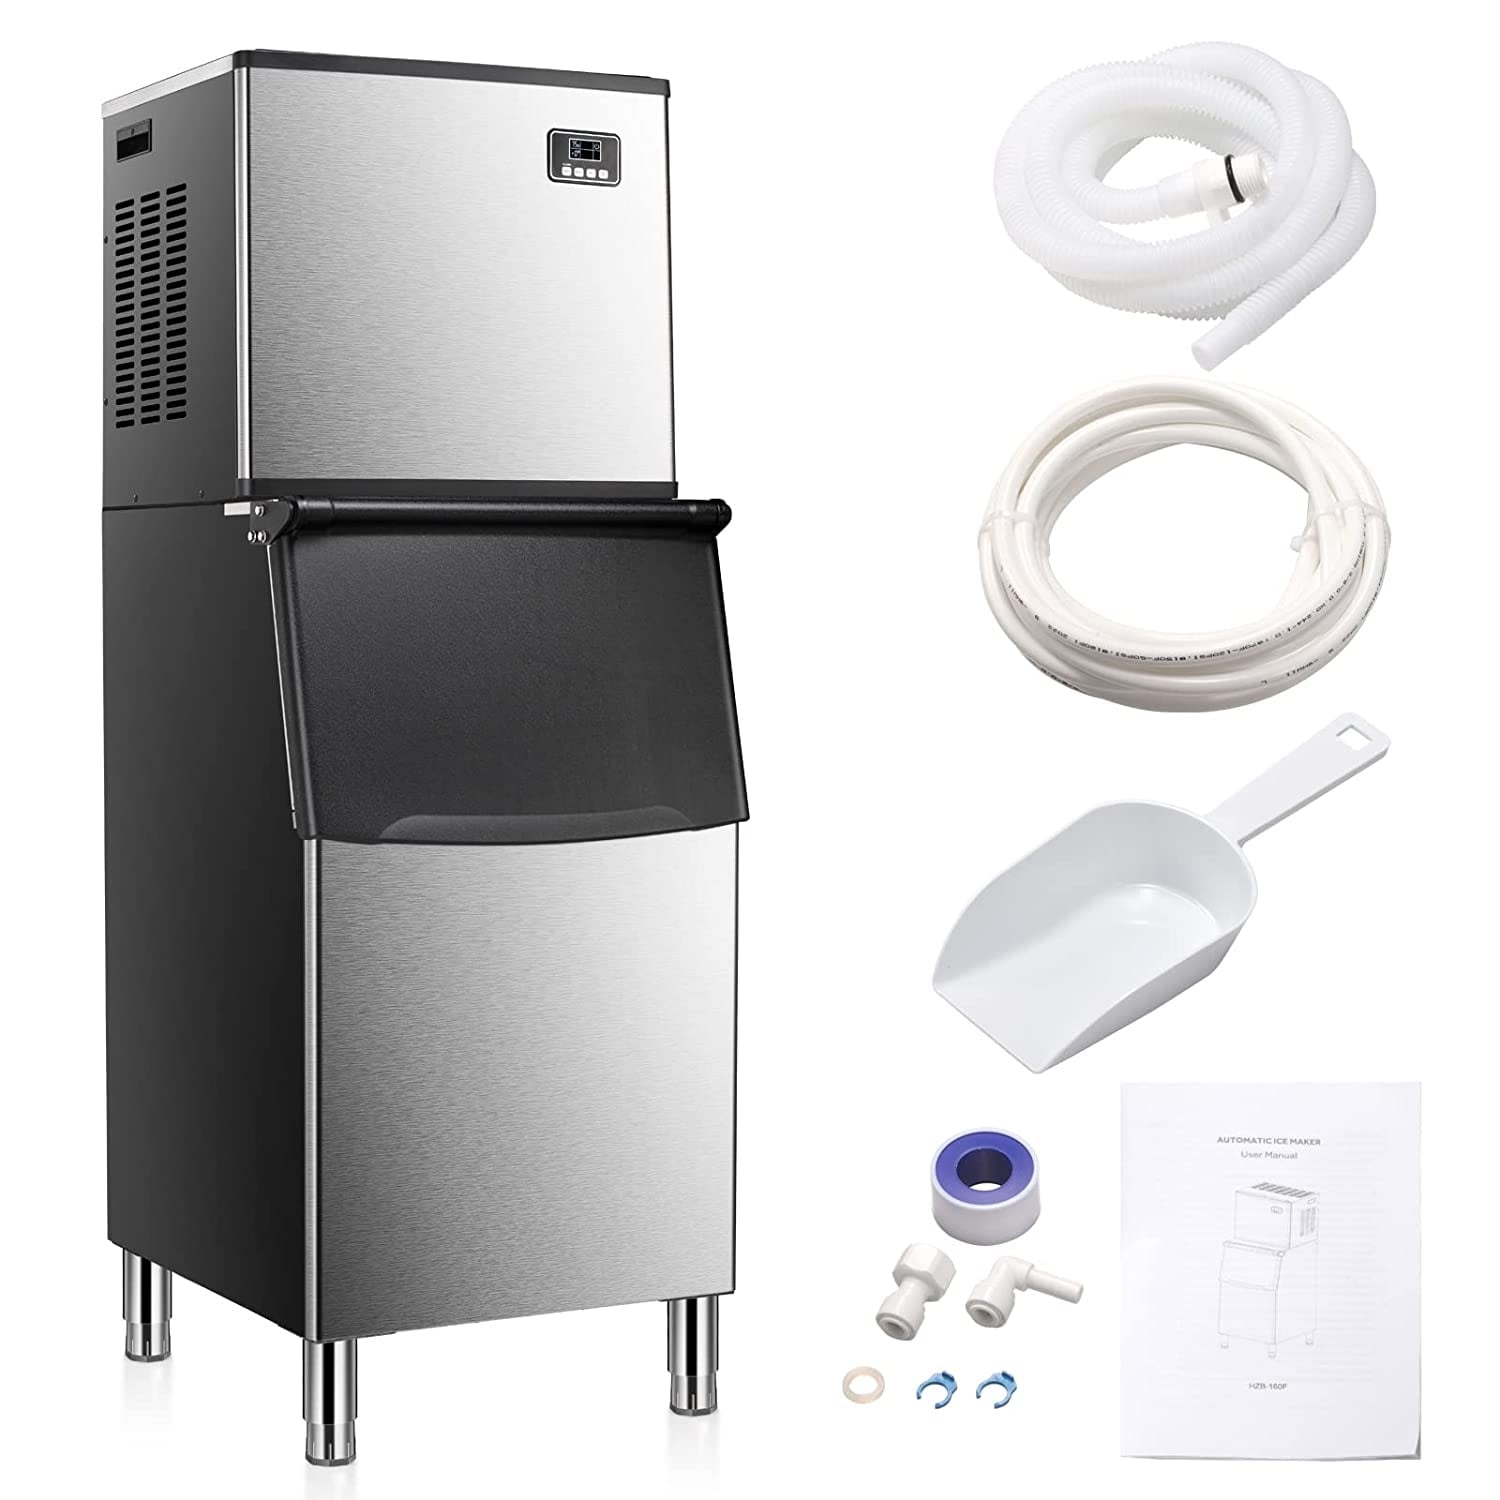 R.W.Flame Nugget Ice Maker Countertop,Portable Ice Maker Machine with –  R.W.FLAME